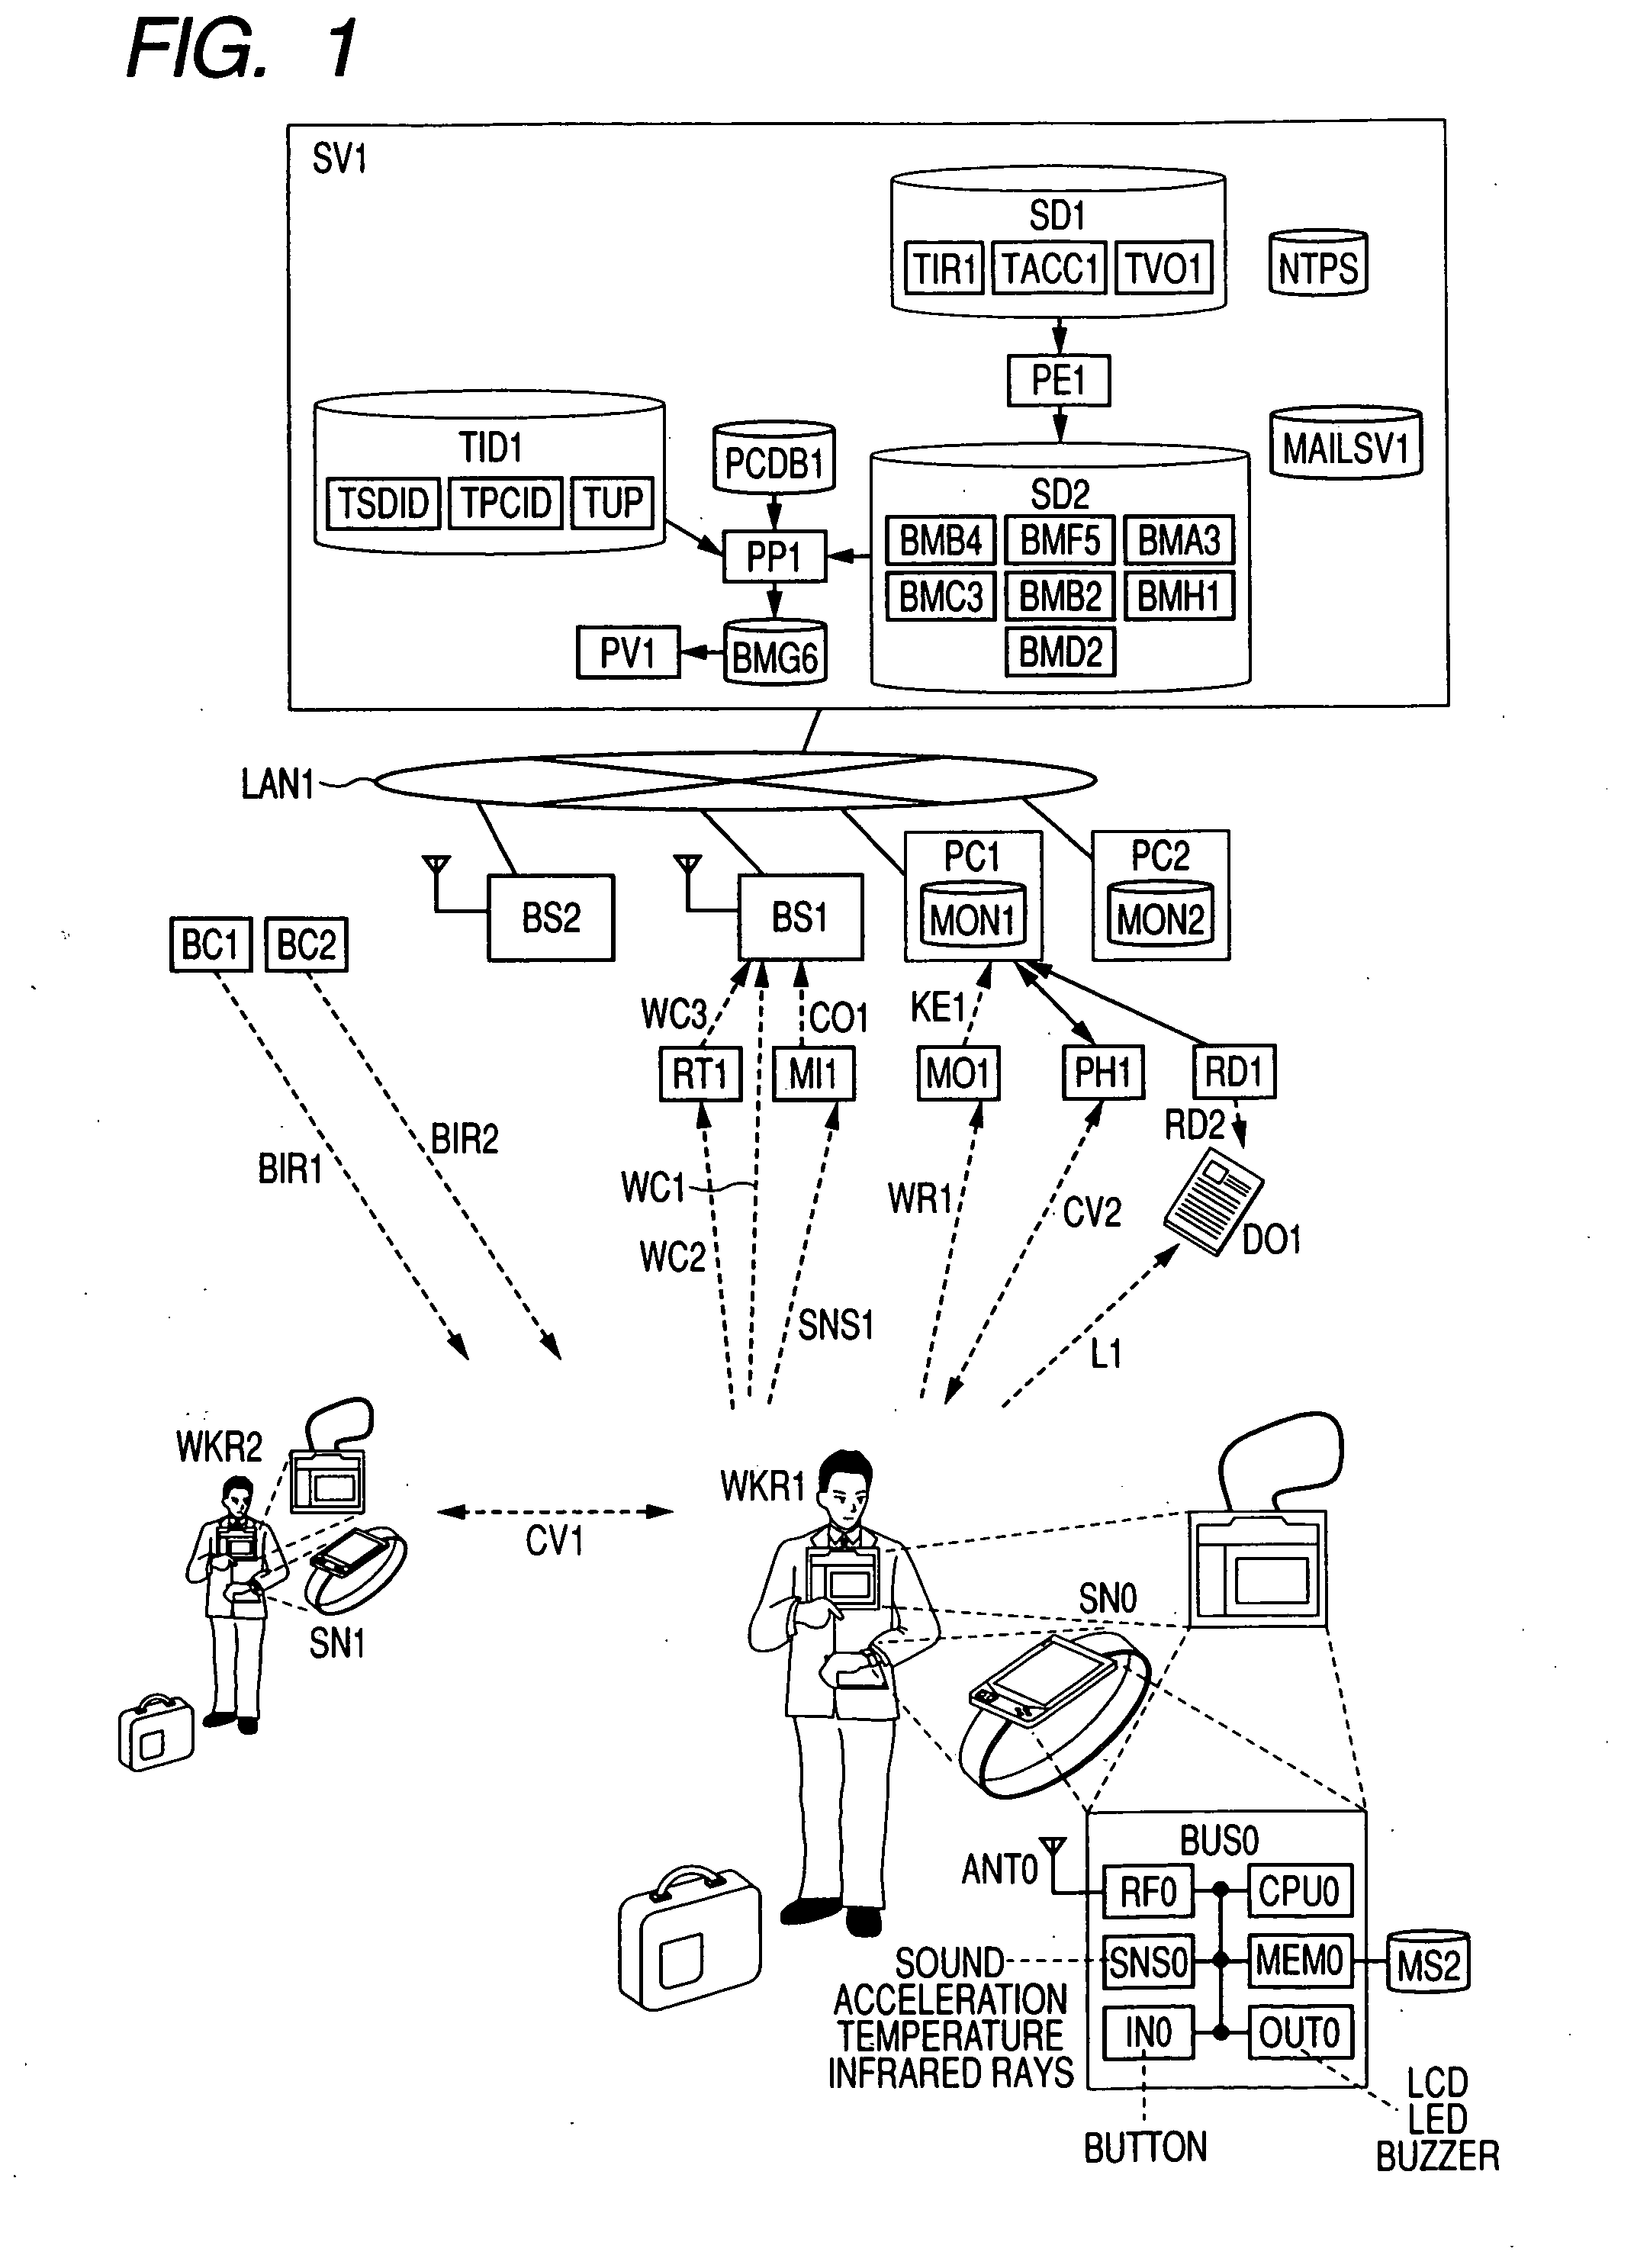 Server and sensor net system for measuring quality of activity